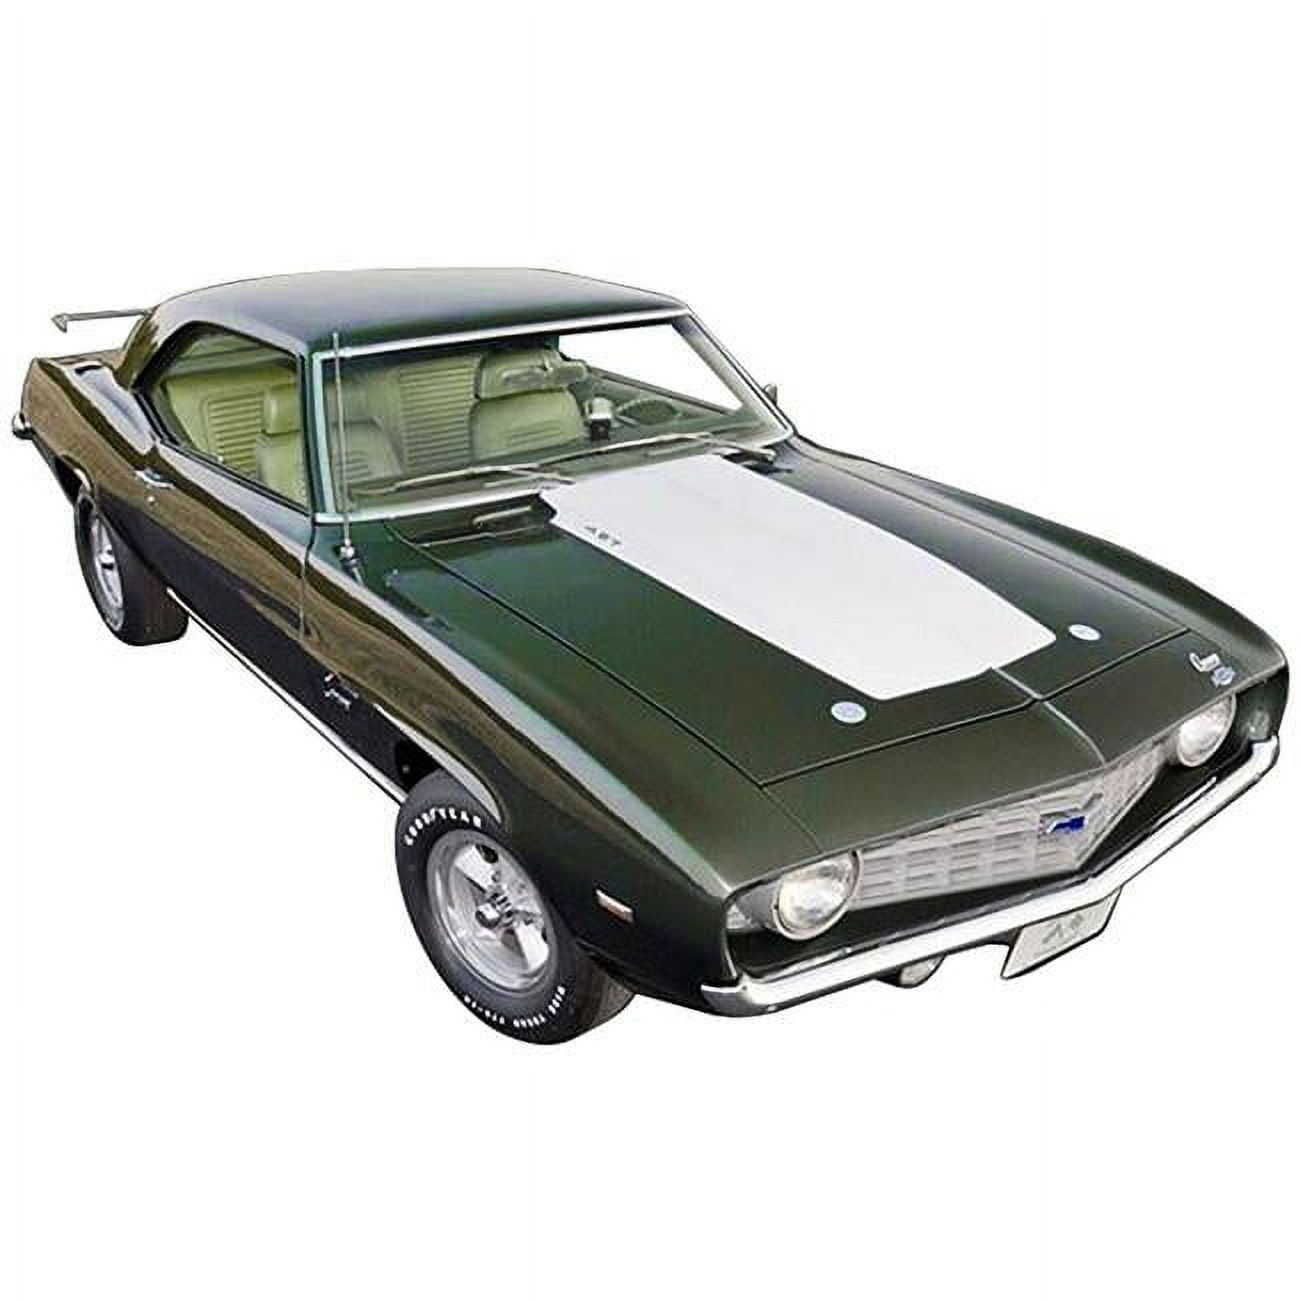 Picture of Acme A1805724 1969 Chevrolet Copo Camaro Dark Green Metallic with White Hood & Green Interior Built by Dick Harrell Limited Edition to Worldwide 1-18 Scale Diecast Model Car - 864 Piece